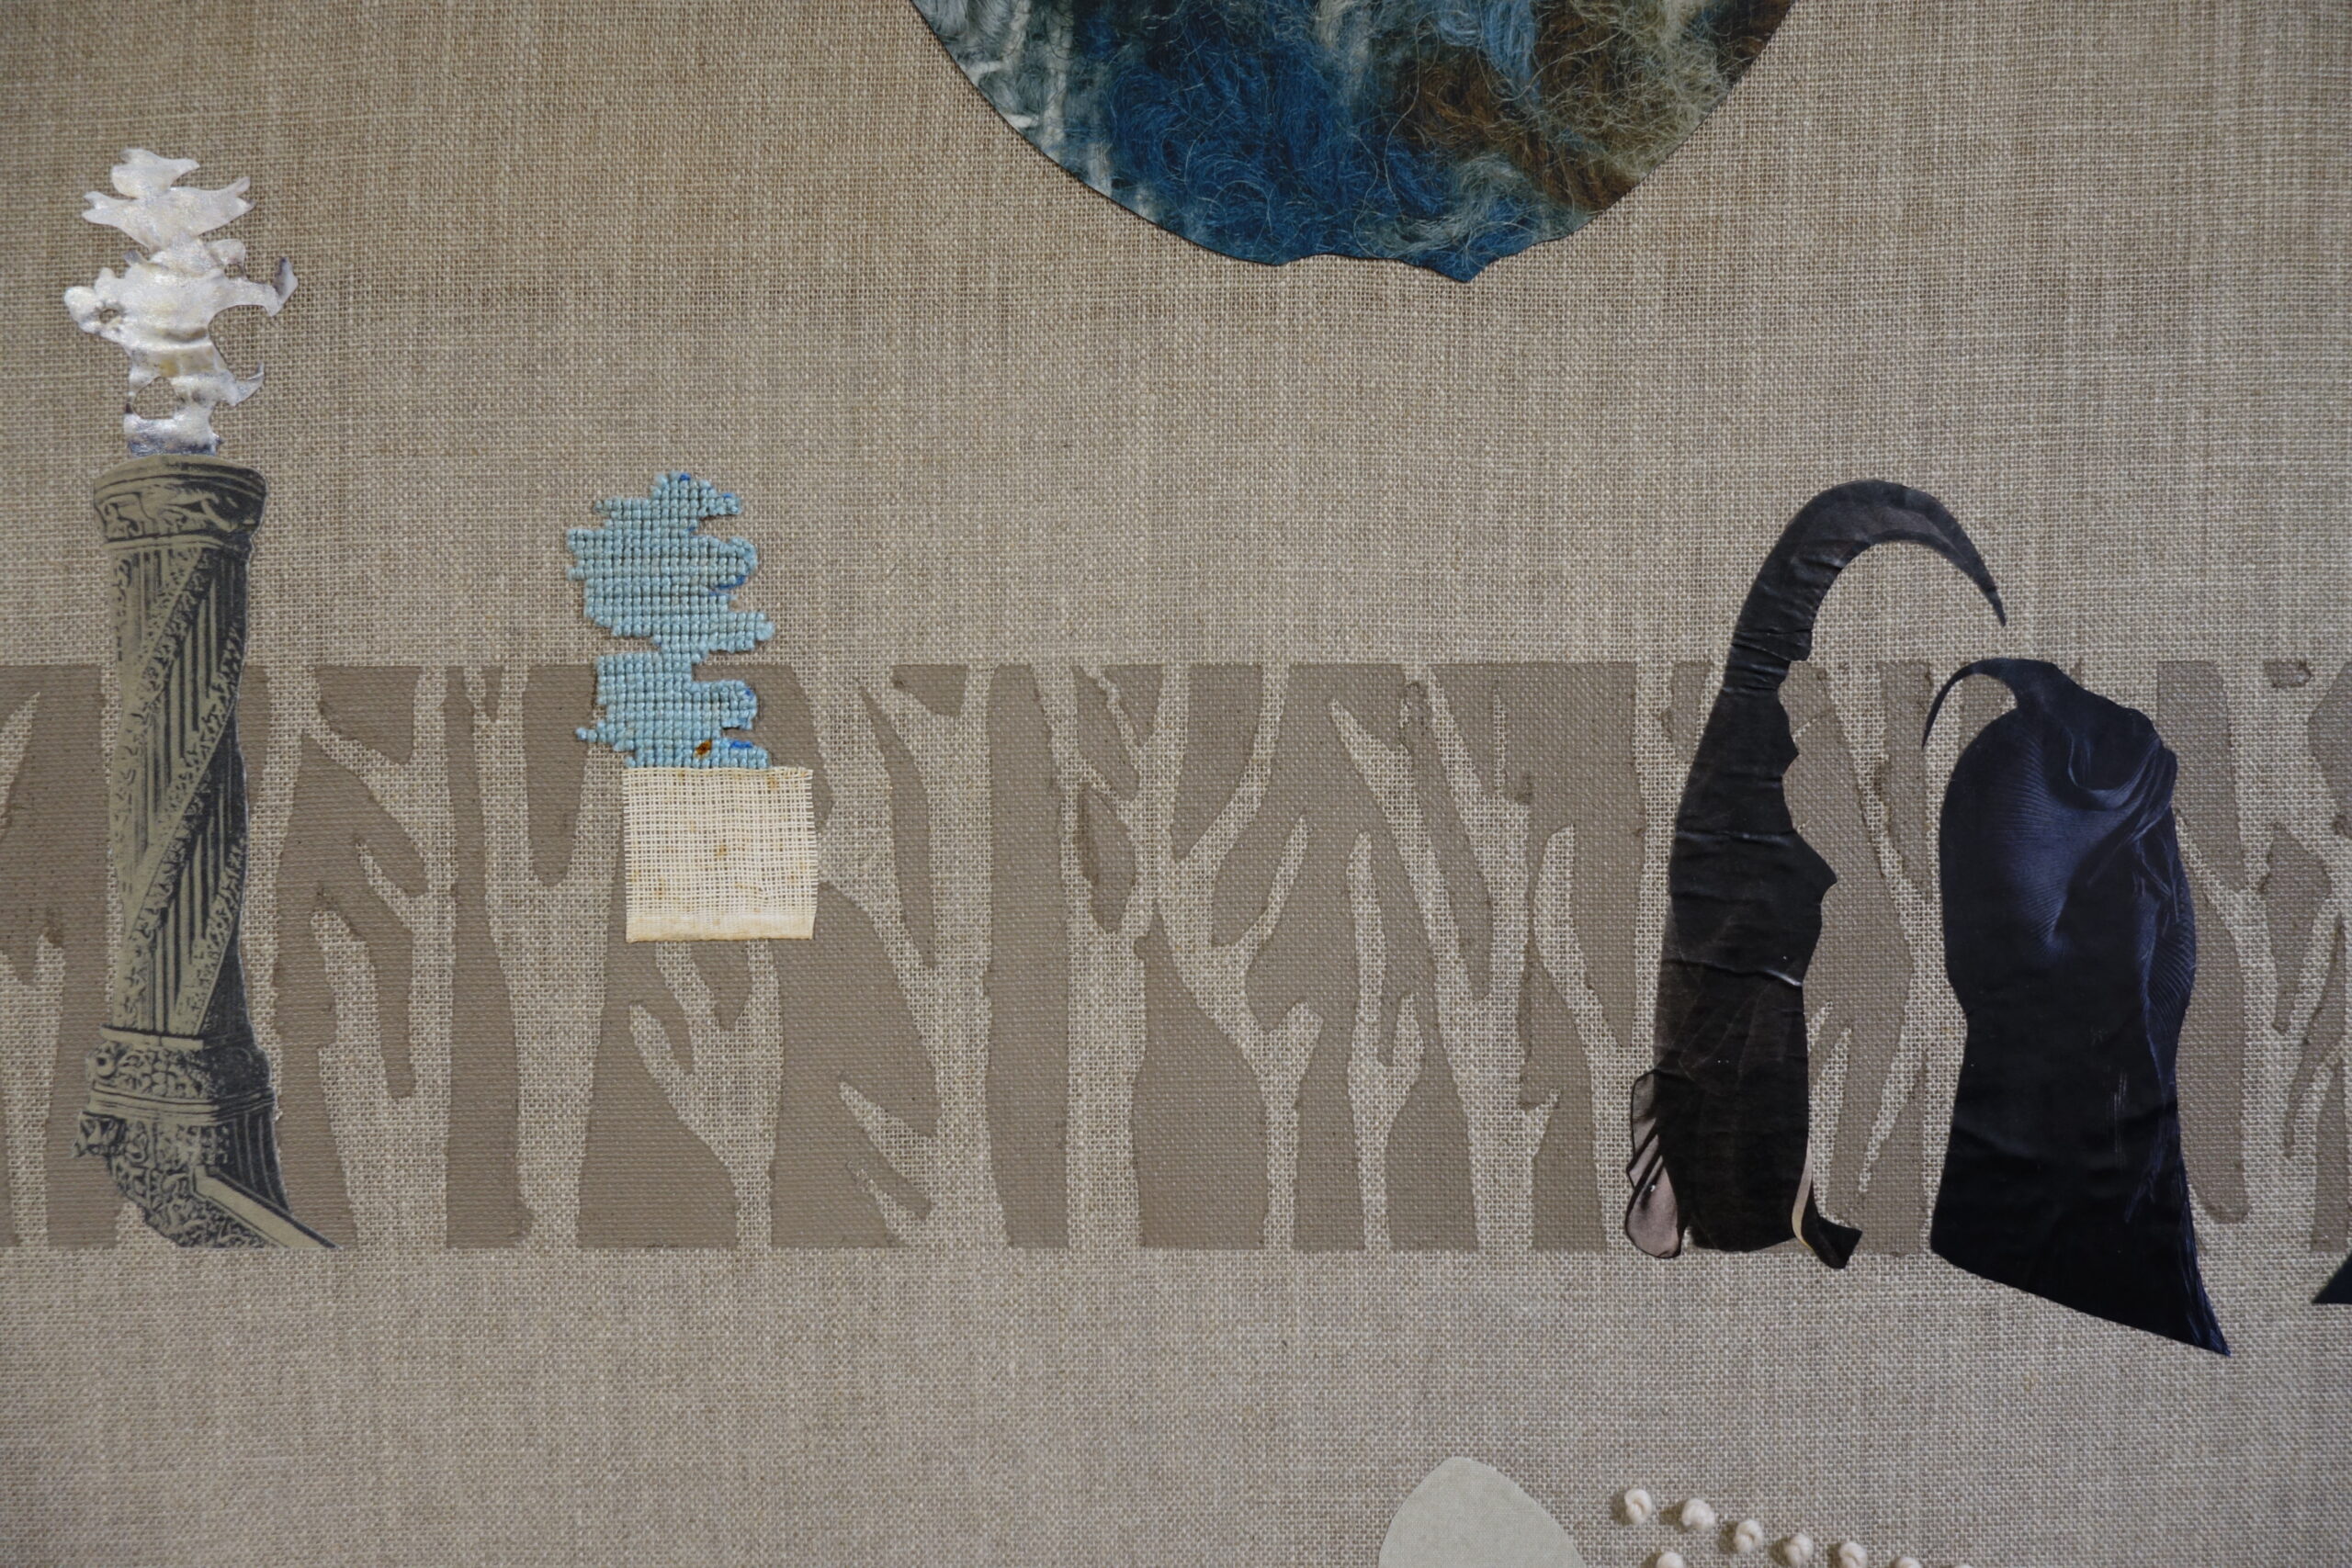 When much had been forgotten: fragments of tapestry, collage and embroidery in the shape of statues and organic forms are scattered across a pale grey-brown linen